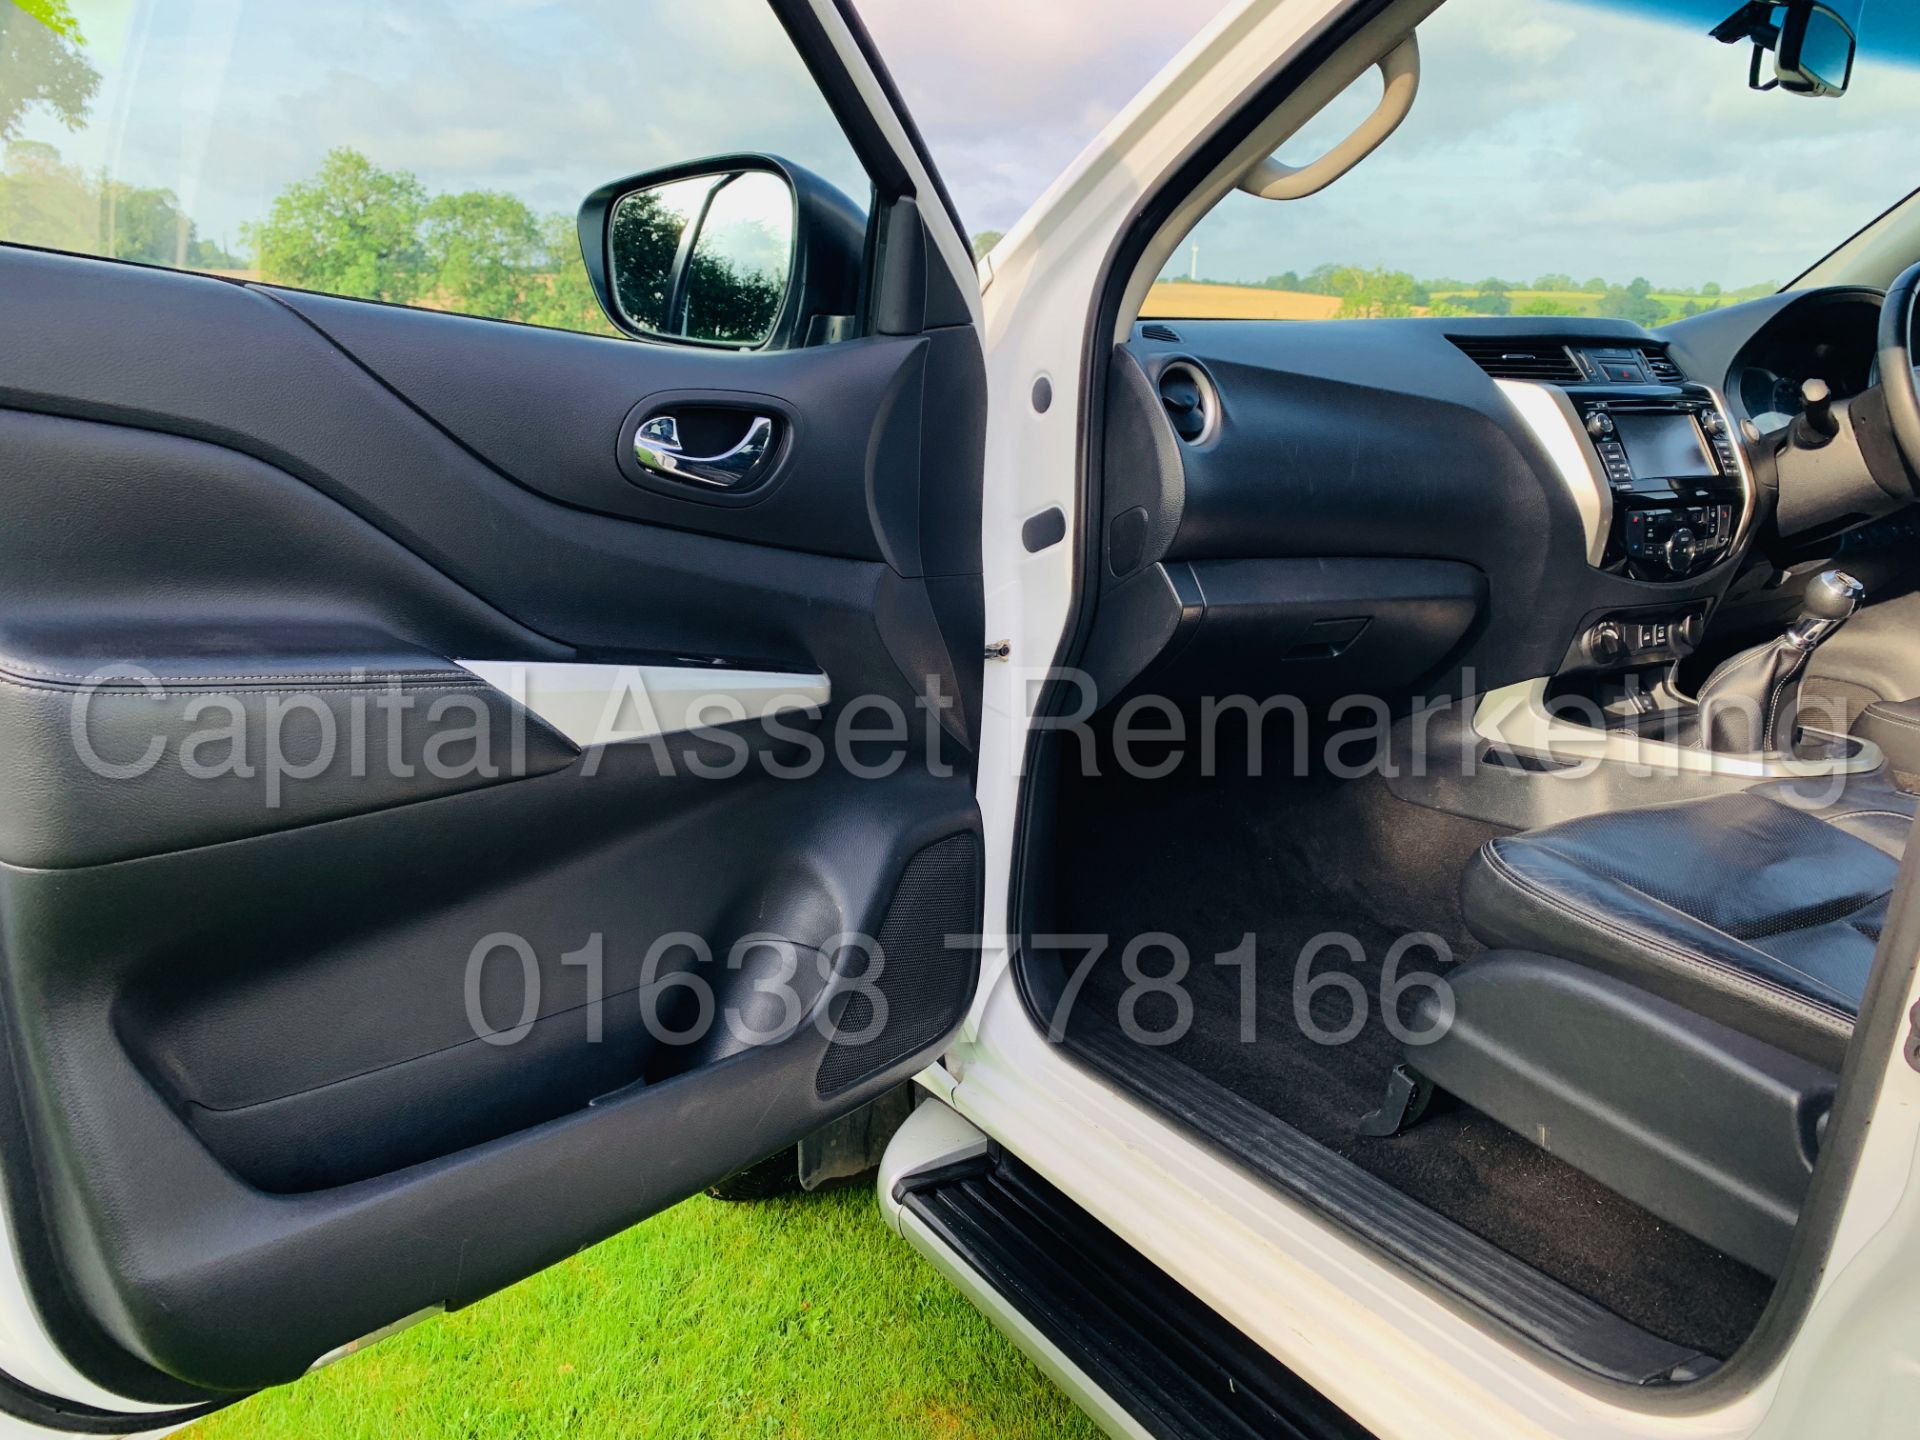 (On Sale) NISSAN NAVARA *TEKNA EDITION* DOUBLE CAB PICK-UP (67 REG) '2.3 DCI - 6 SPEED' (1 OWNER) - Image 23 of 58